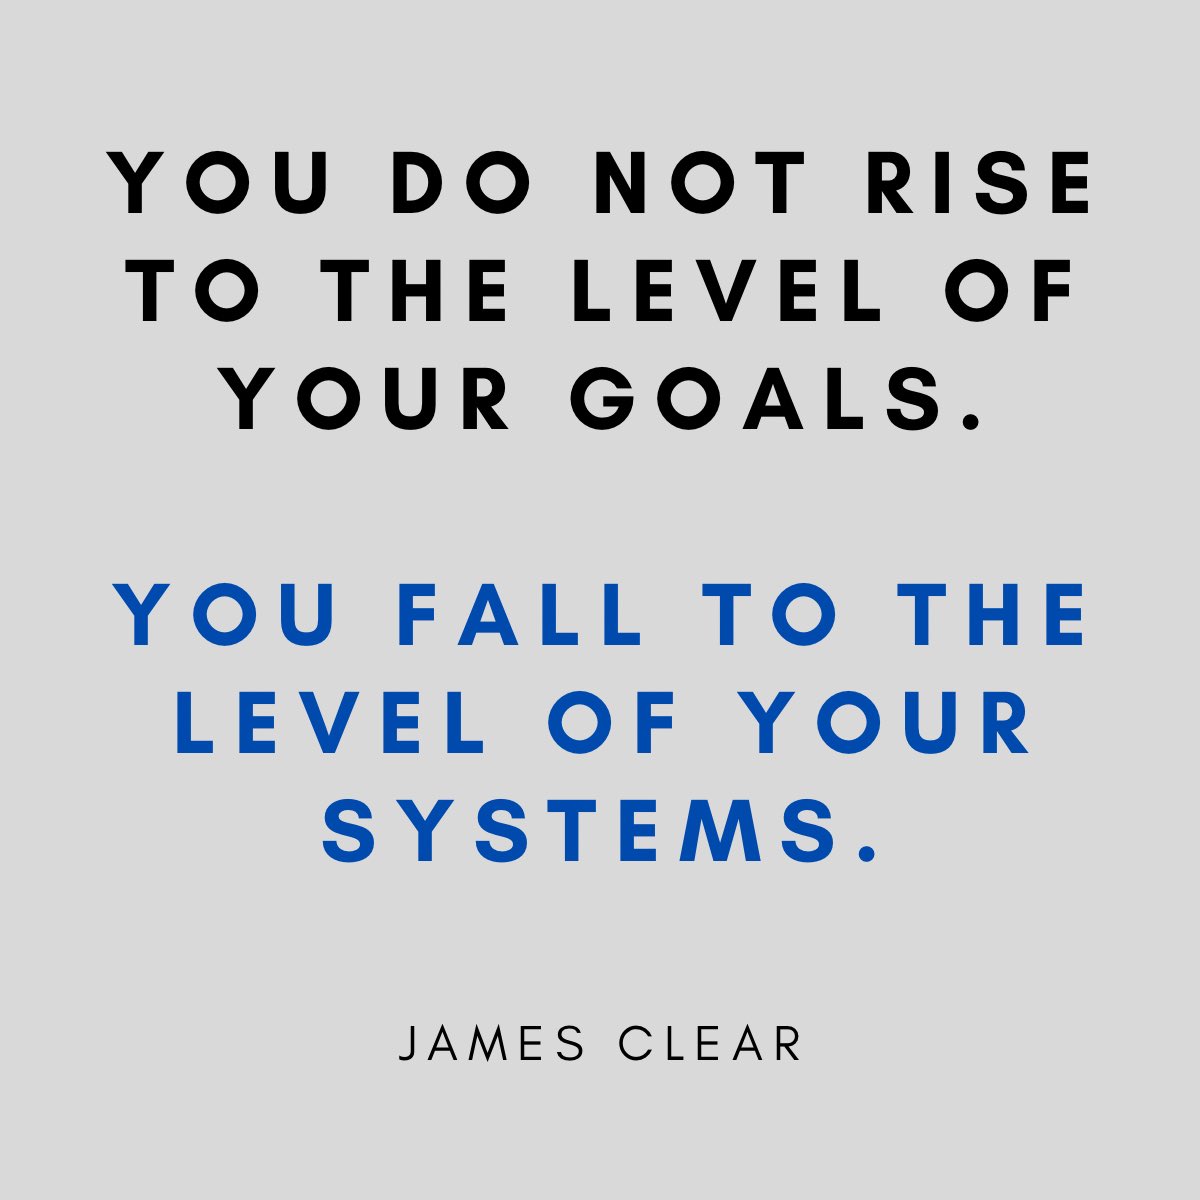 We don’t all belong to the 5AM club but that doesn’t mean we can’t be just as effective in our lives. What are your tried + true SYSTEMS that help you achieve your GOALS?